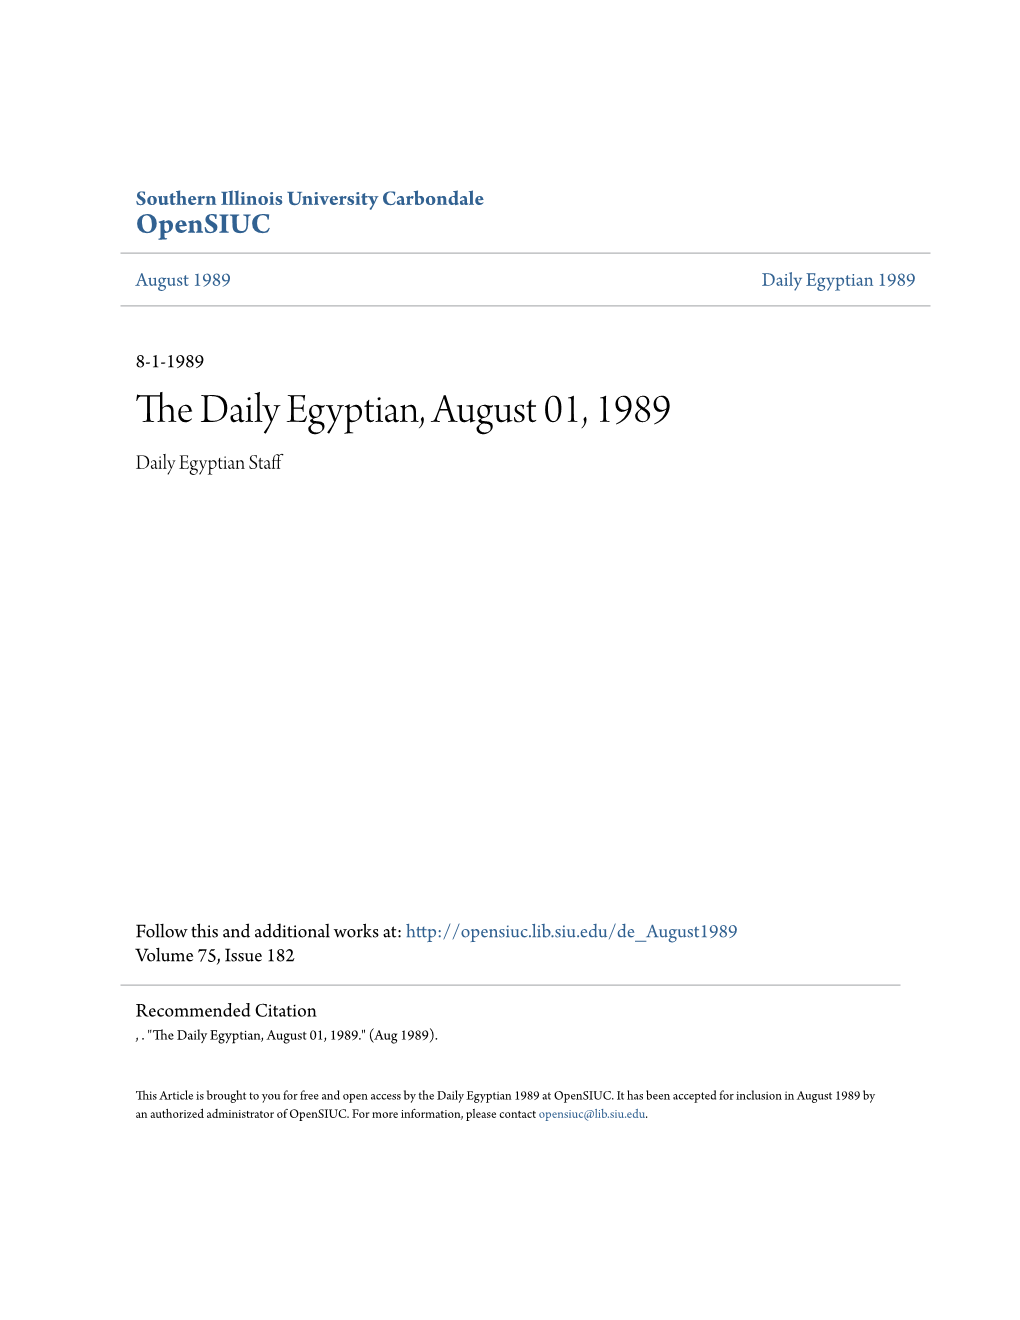 The Daily Egyptian, August 01, 1989